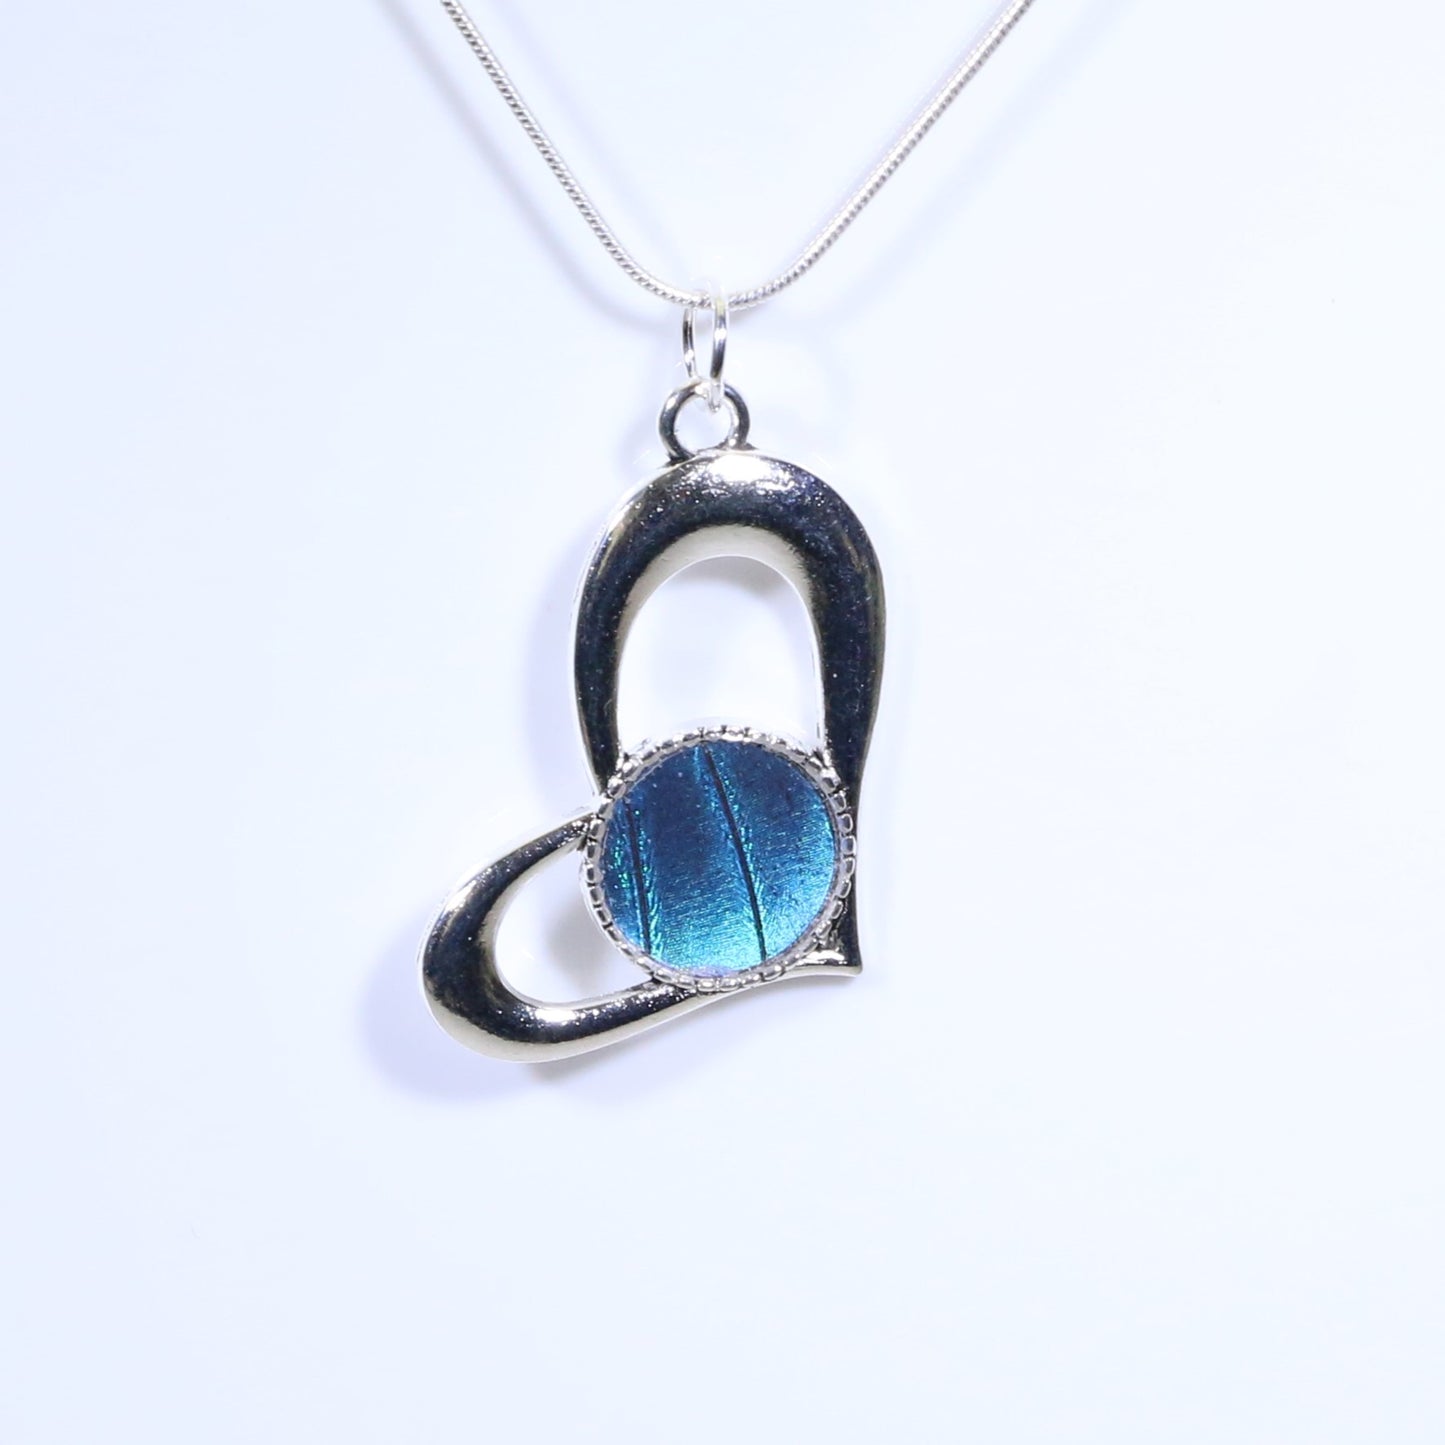 52401 - Real Butterfly Wing Jewelry - Pendant - Heart-Shaped - Blue Morpho